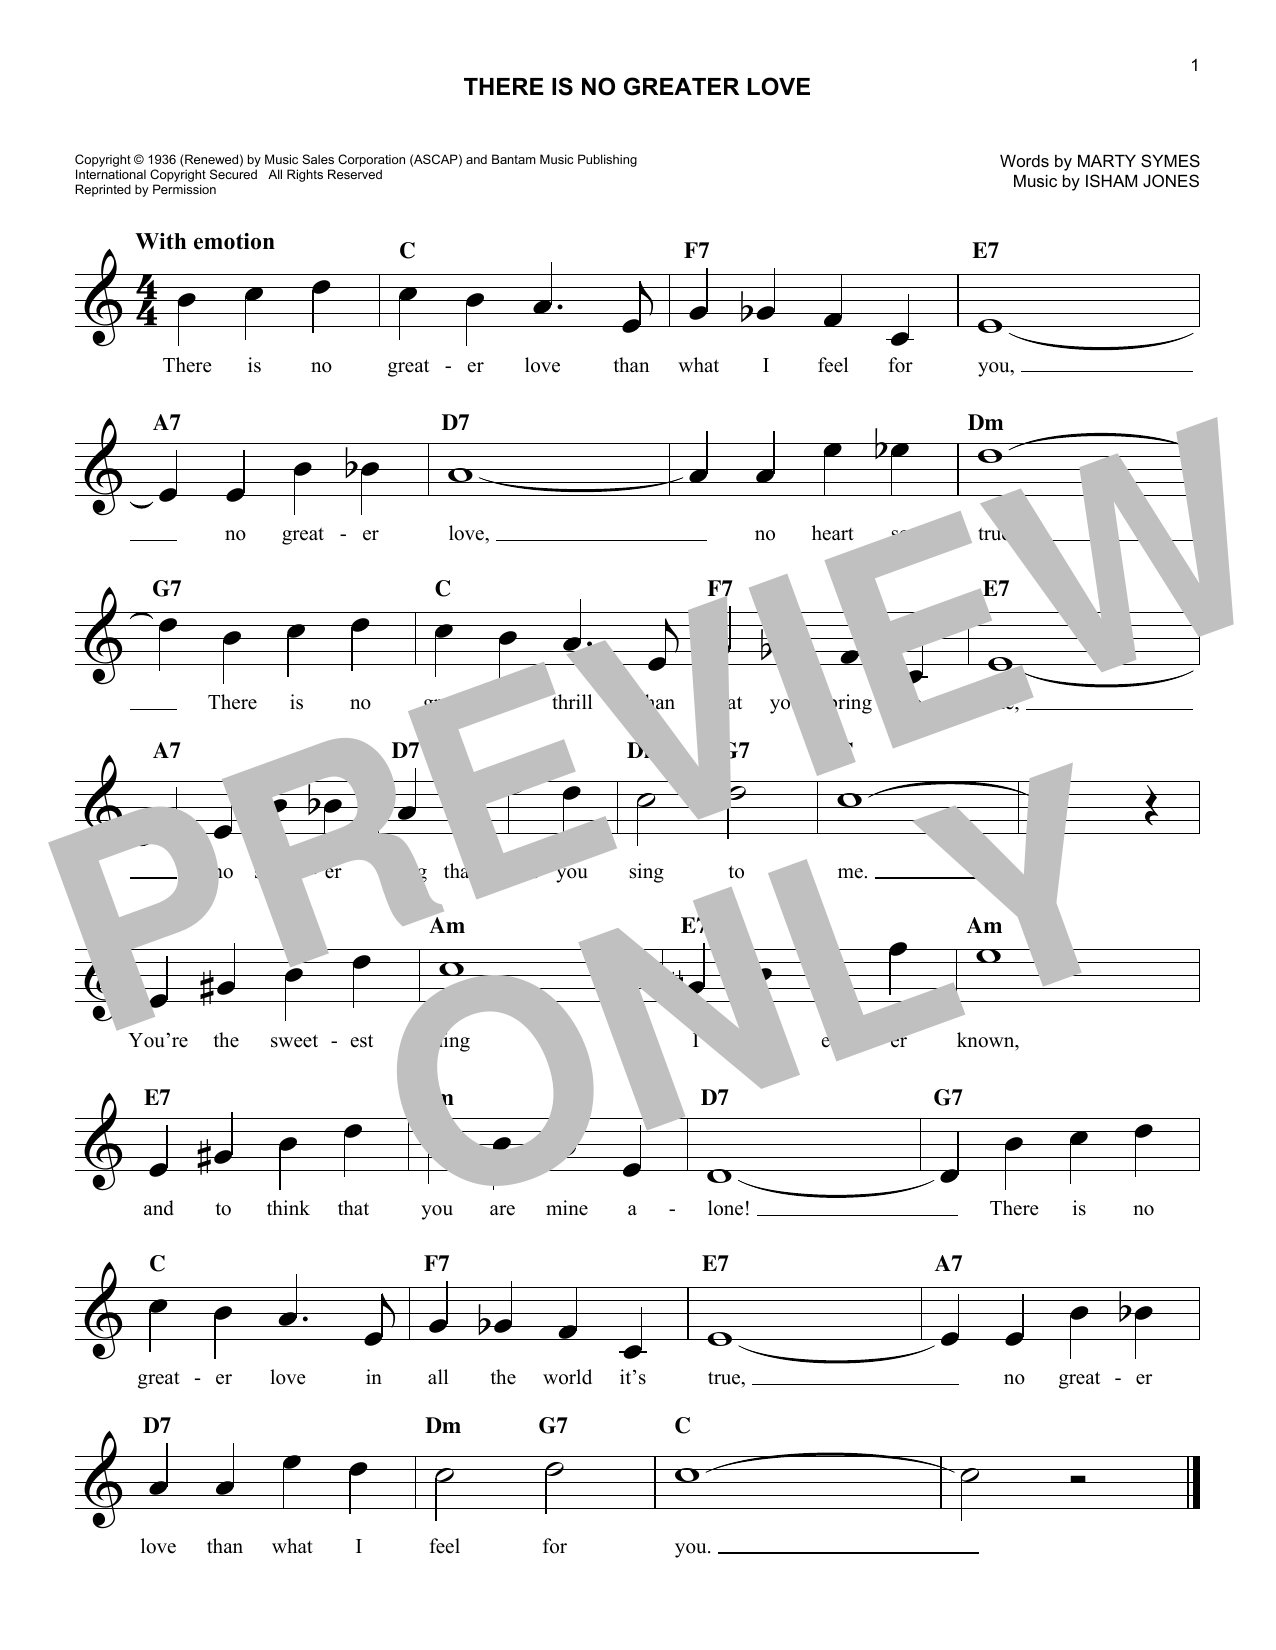 Download Isham Jones (There Is) No Greater Love Sheet Music